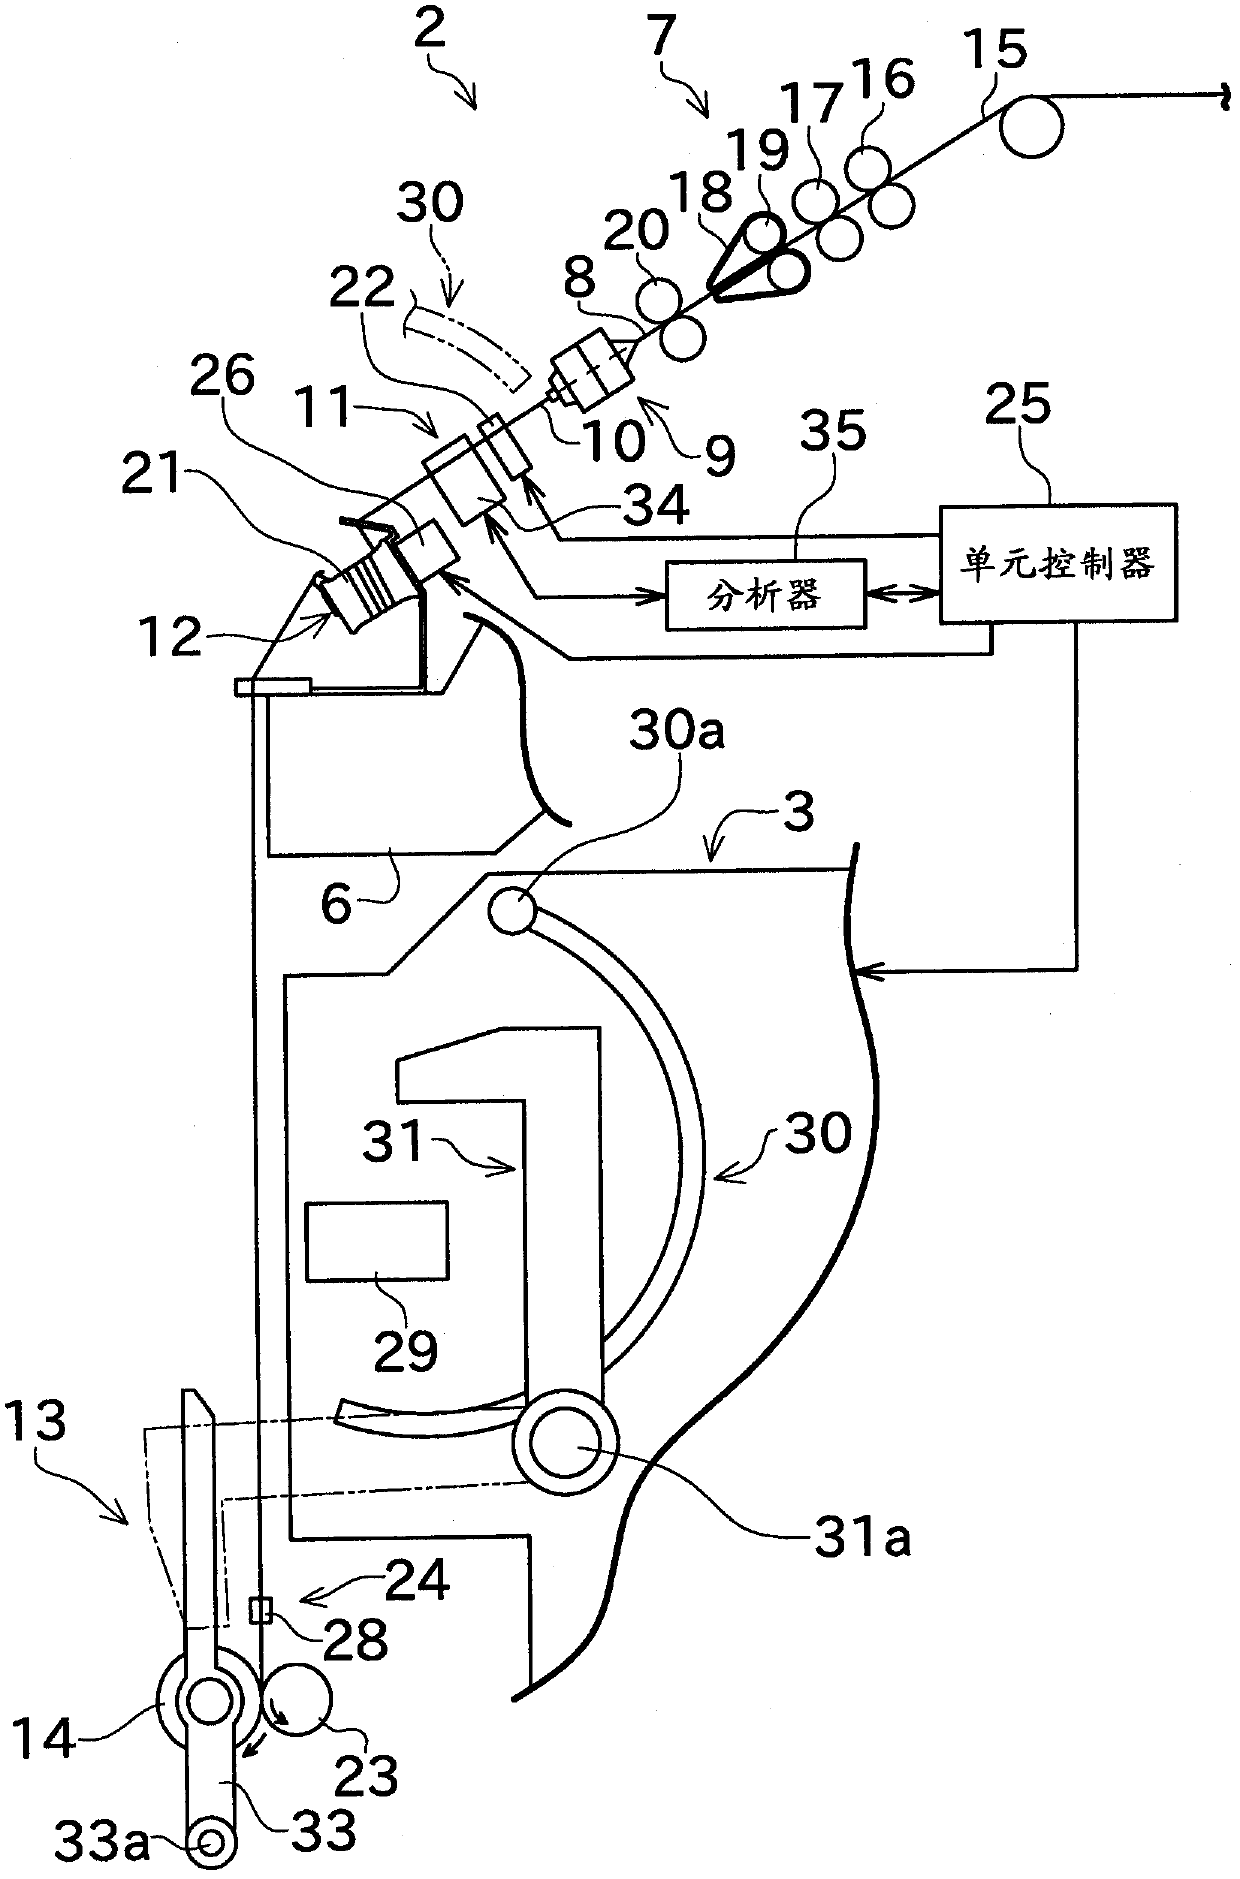 Textile-material monitoring device and yarn winding apparatus